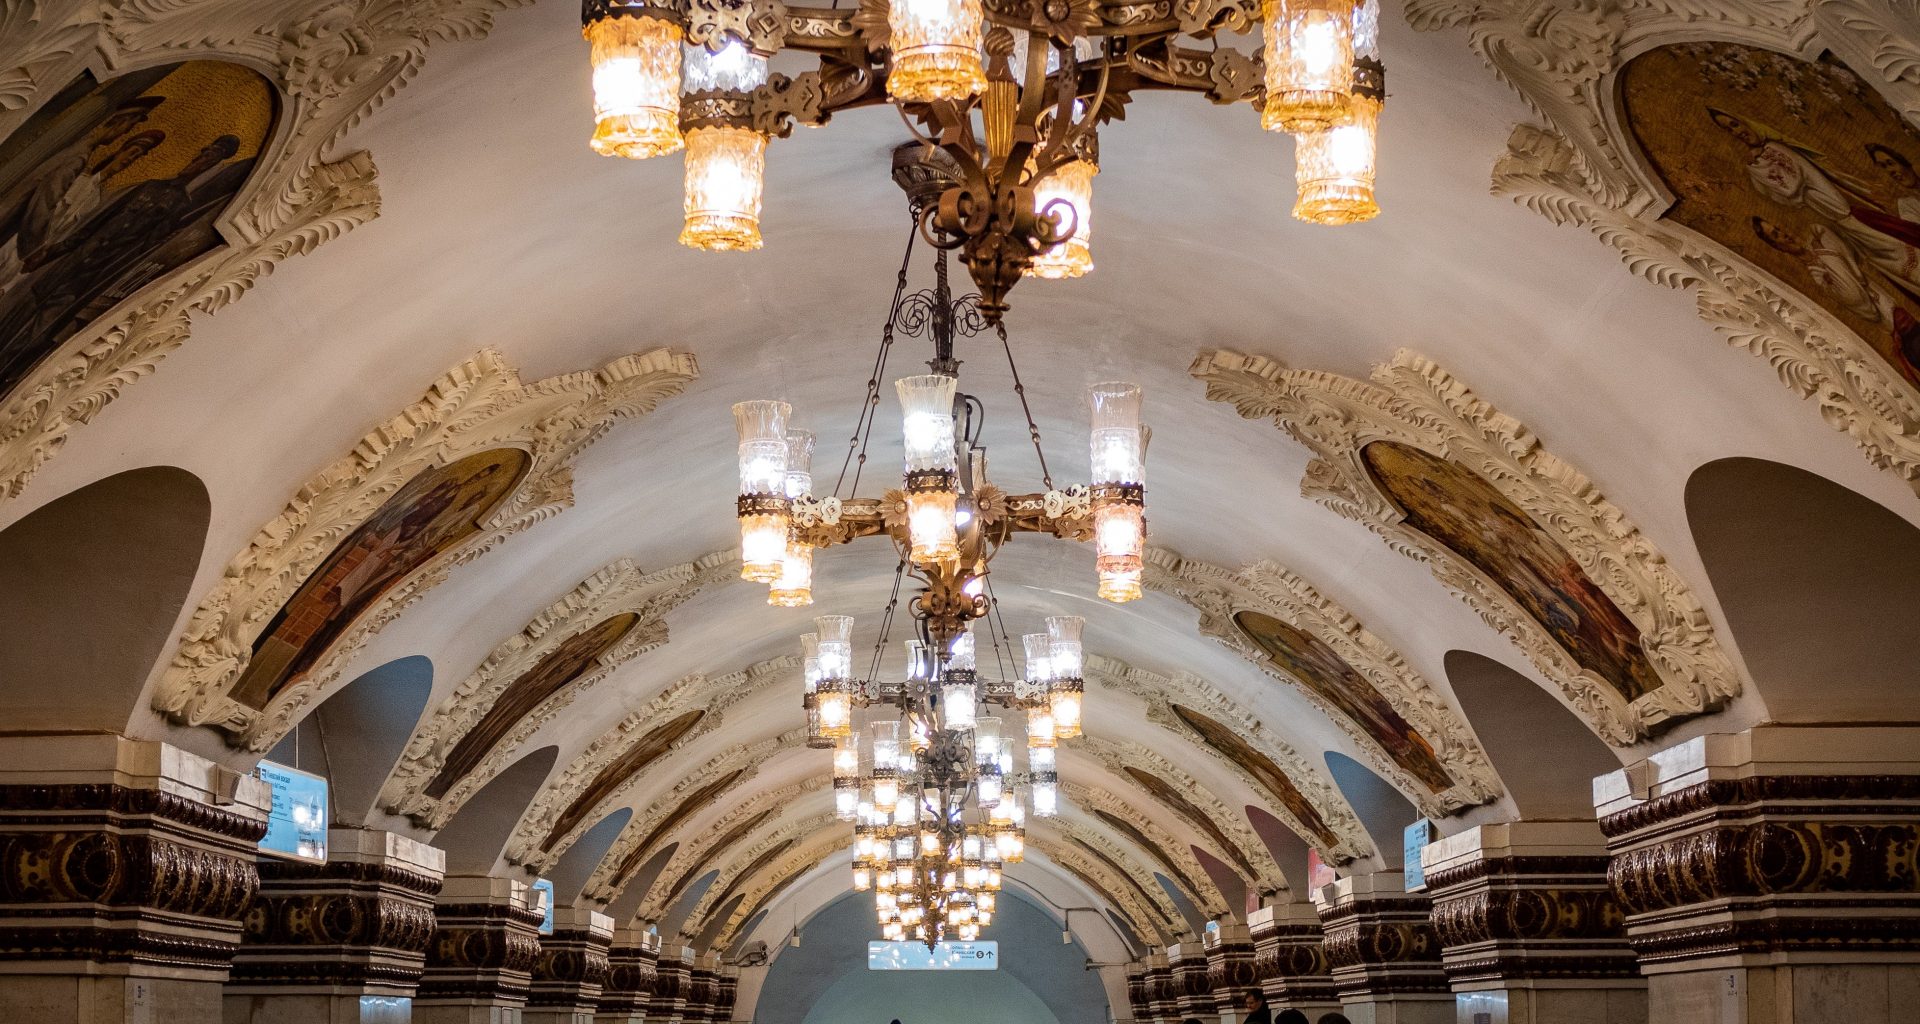 Moscow metro stations: most beautiful ones & how to use Moscow metro